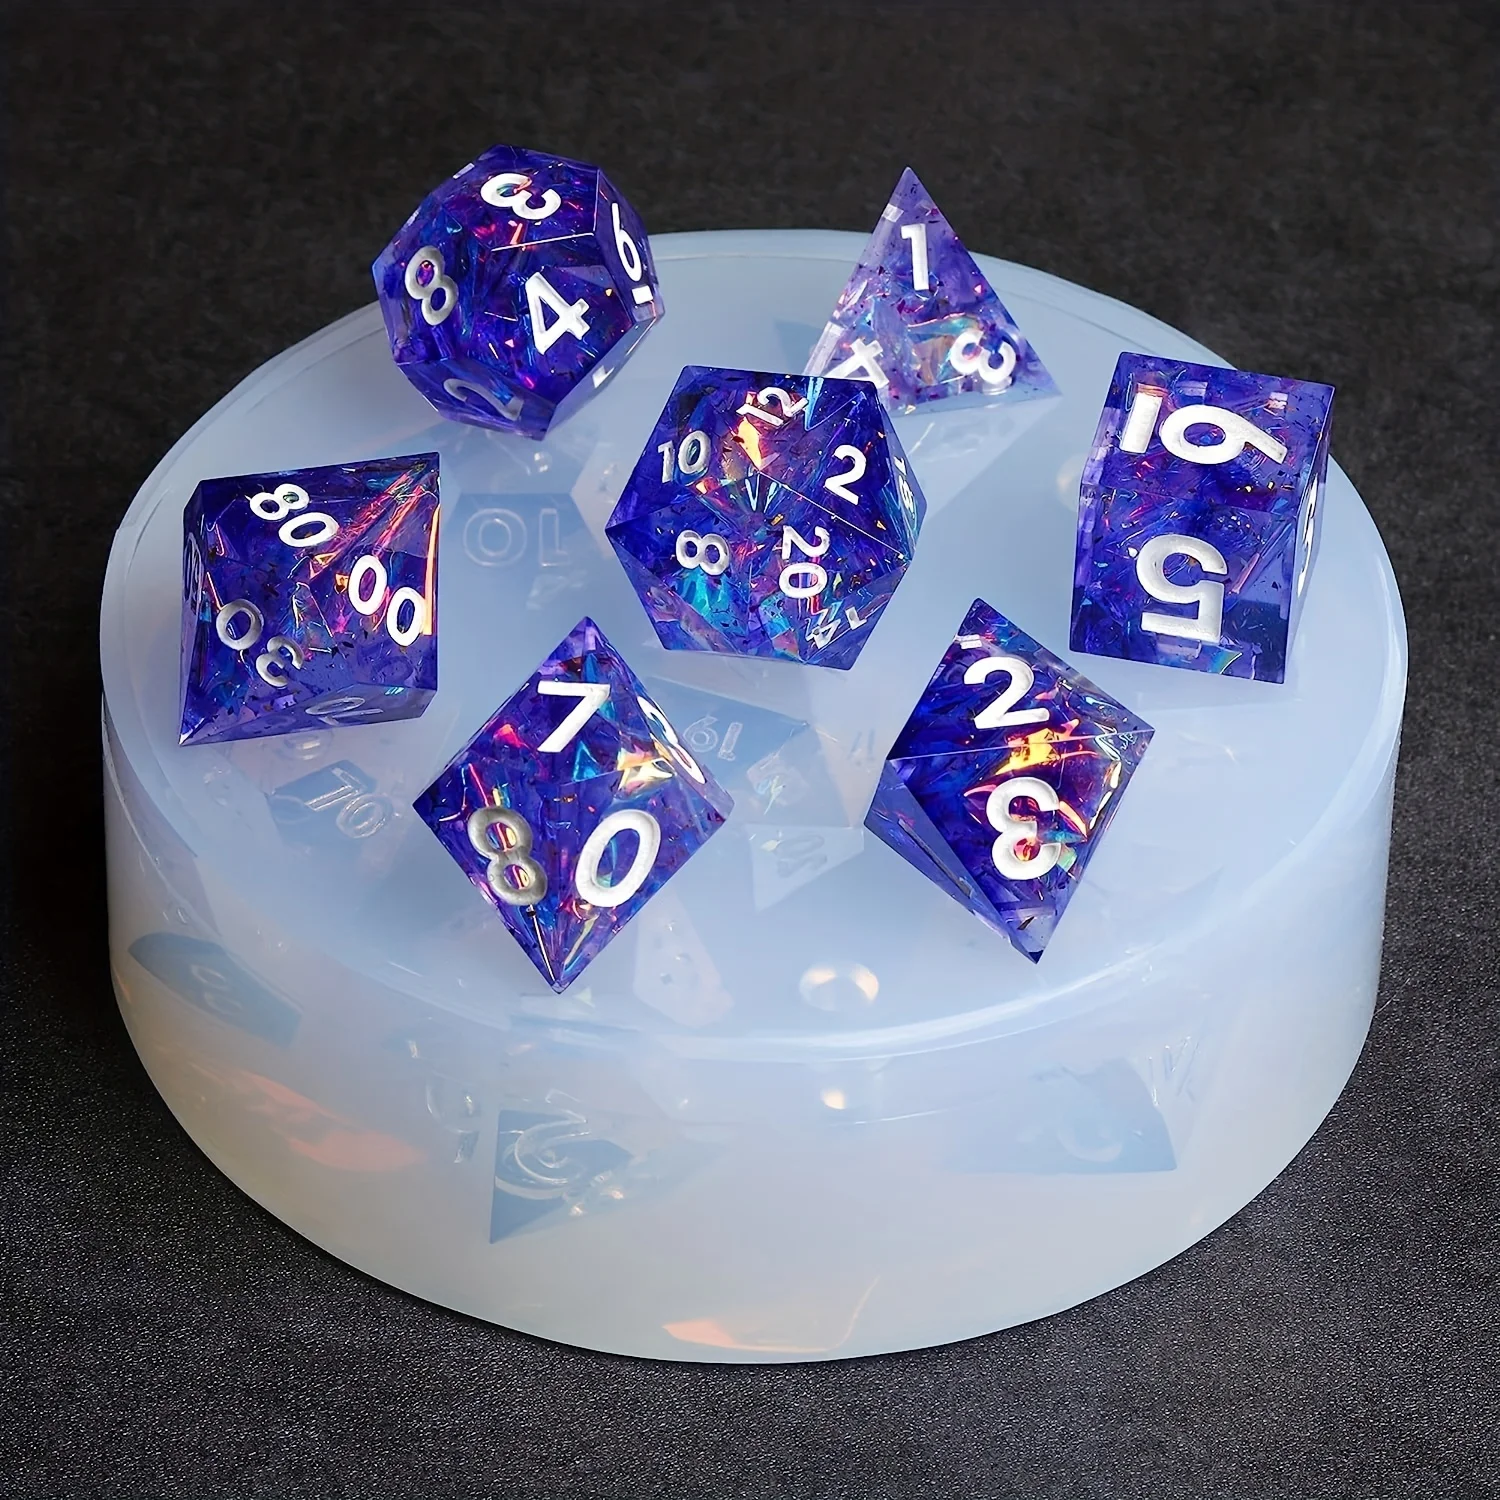 Dice Molds For Resin 3d Polyhedral Dice Molds For Resin Casting Dnd Dice  Dragon And Dungeon Game Themed Design Silicone Mold For - Soap Molds -  AliExpress